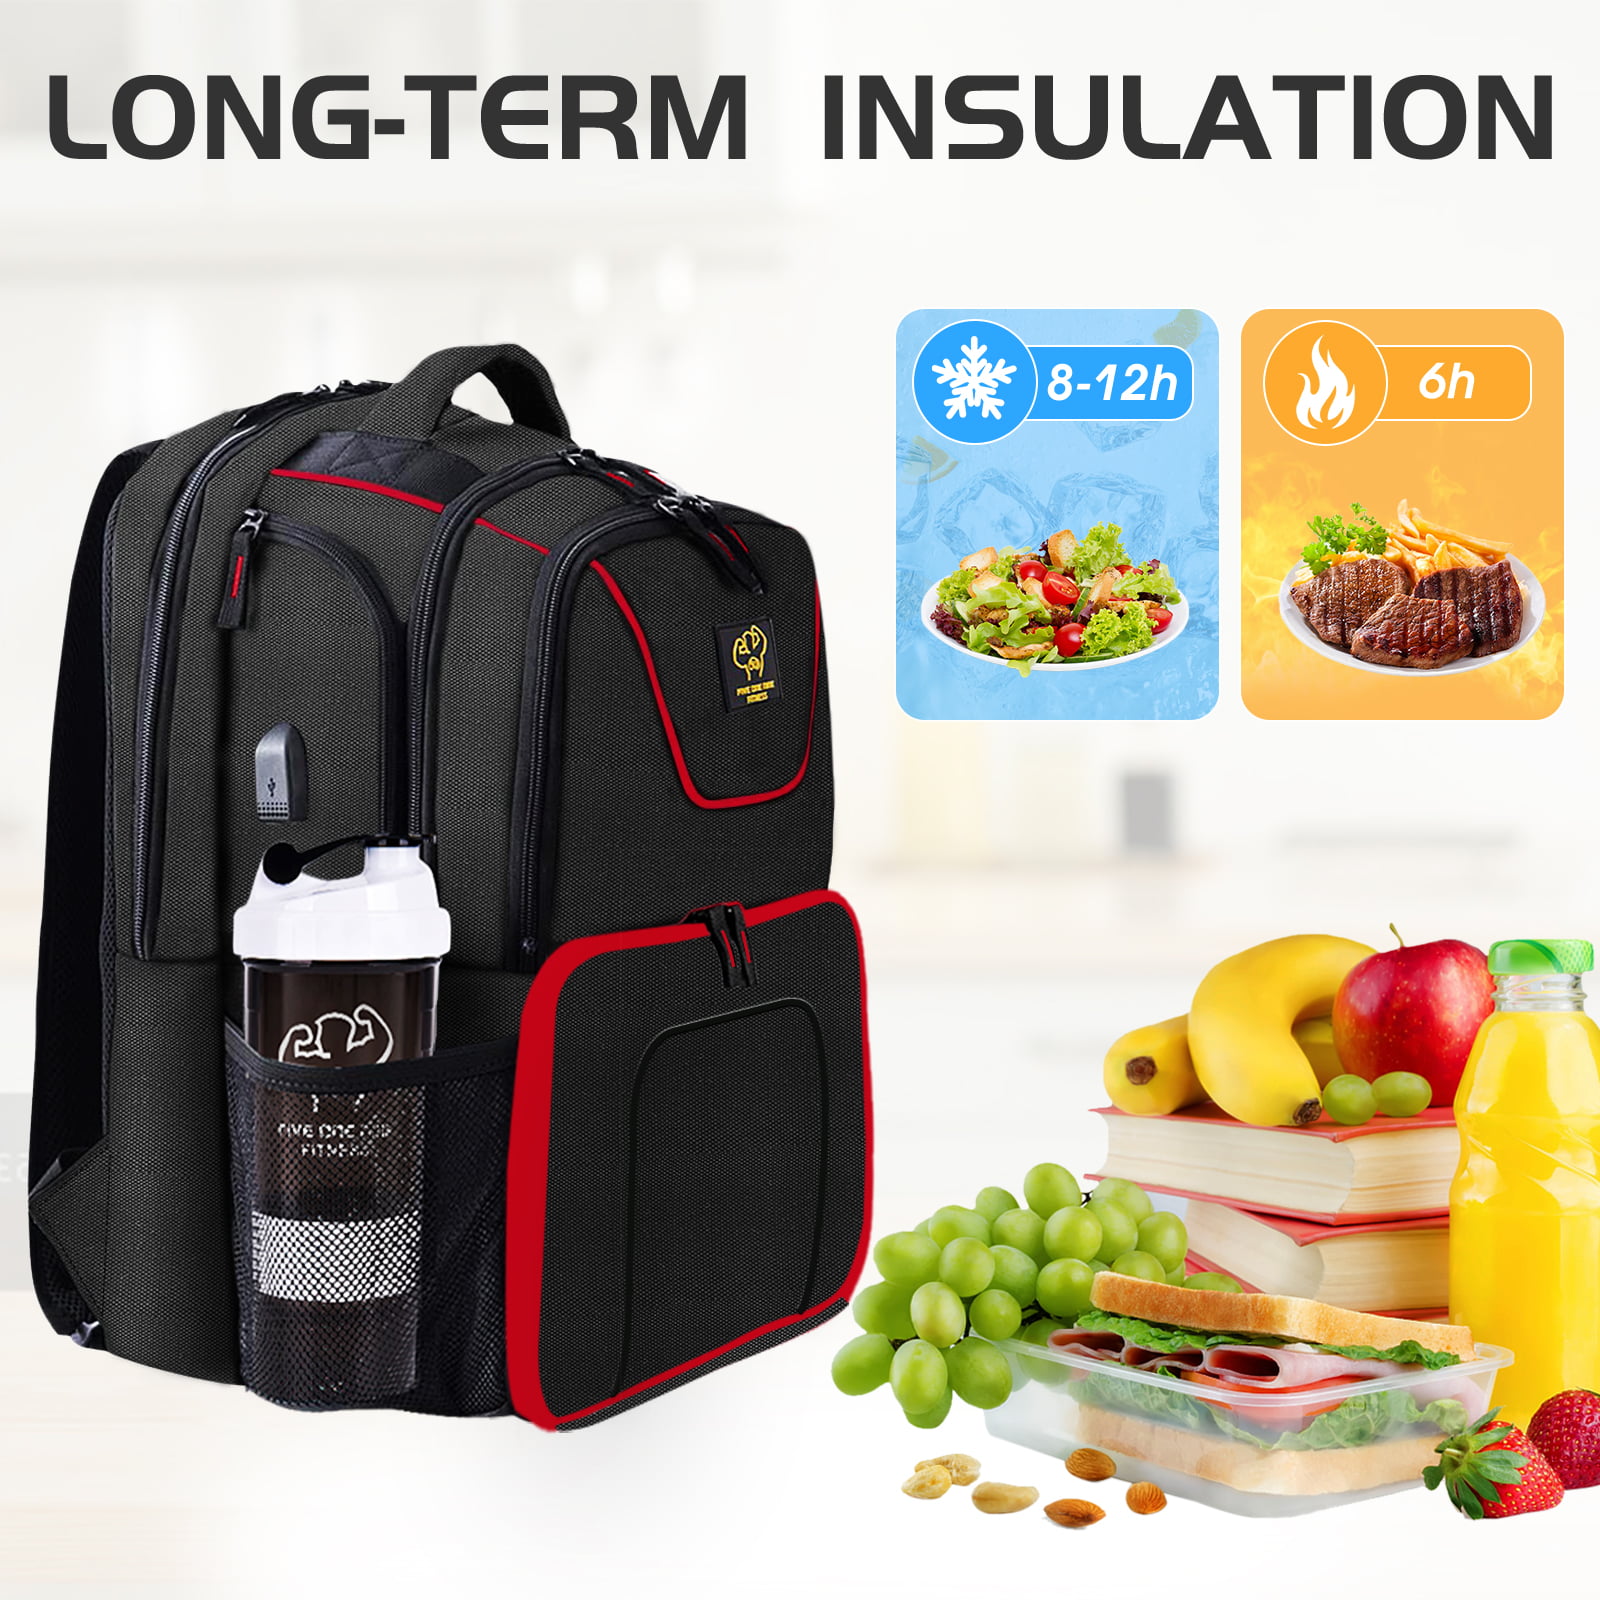 519 Fitness Tactical Meal Prep Backpack With Removable Meal Compartment